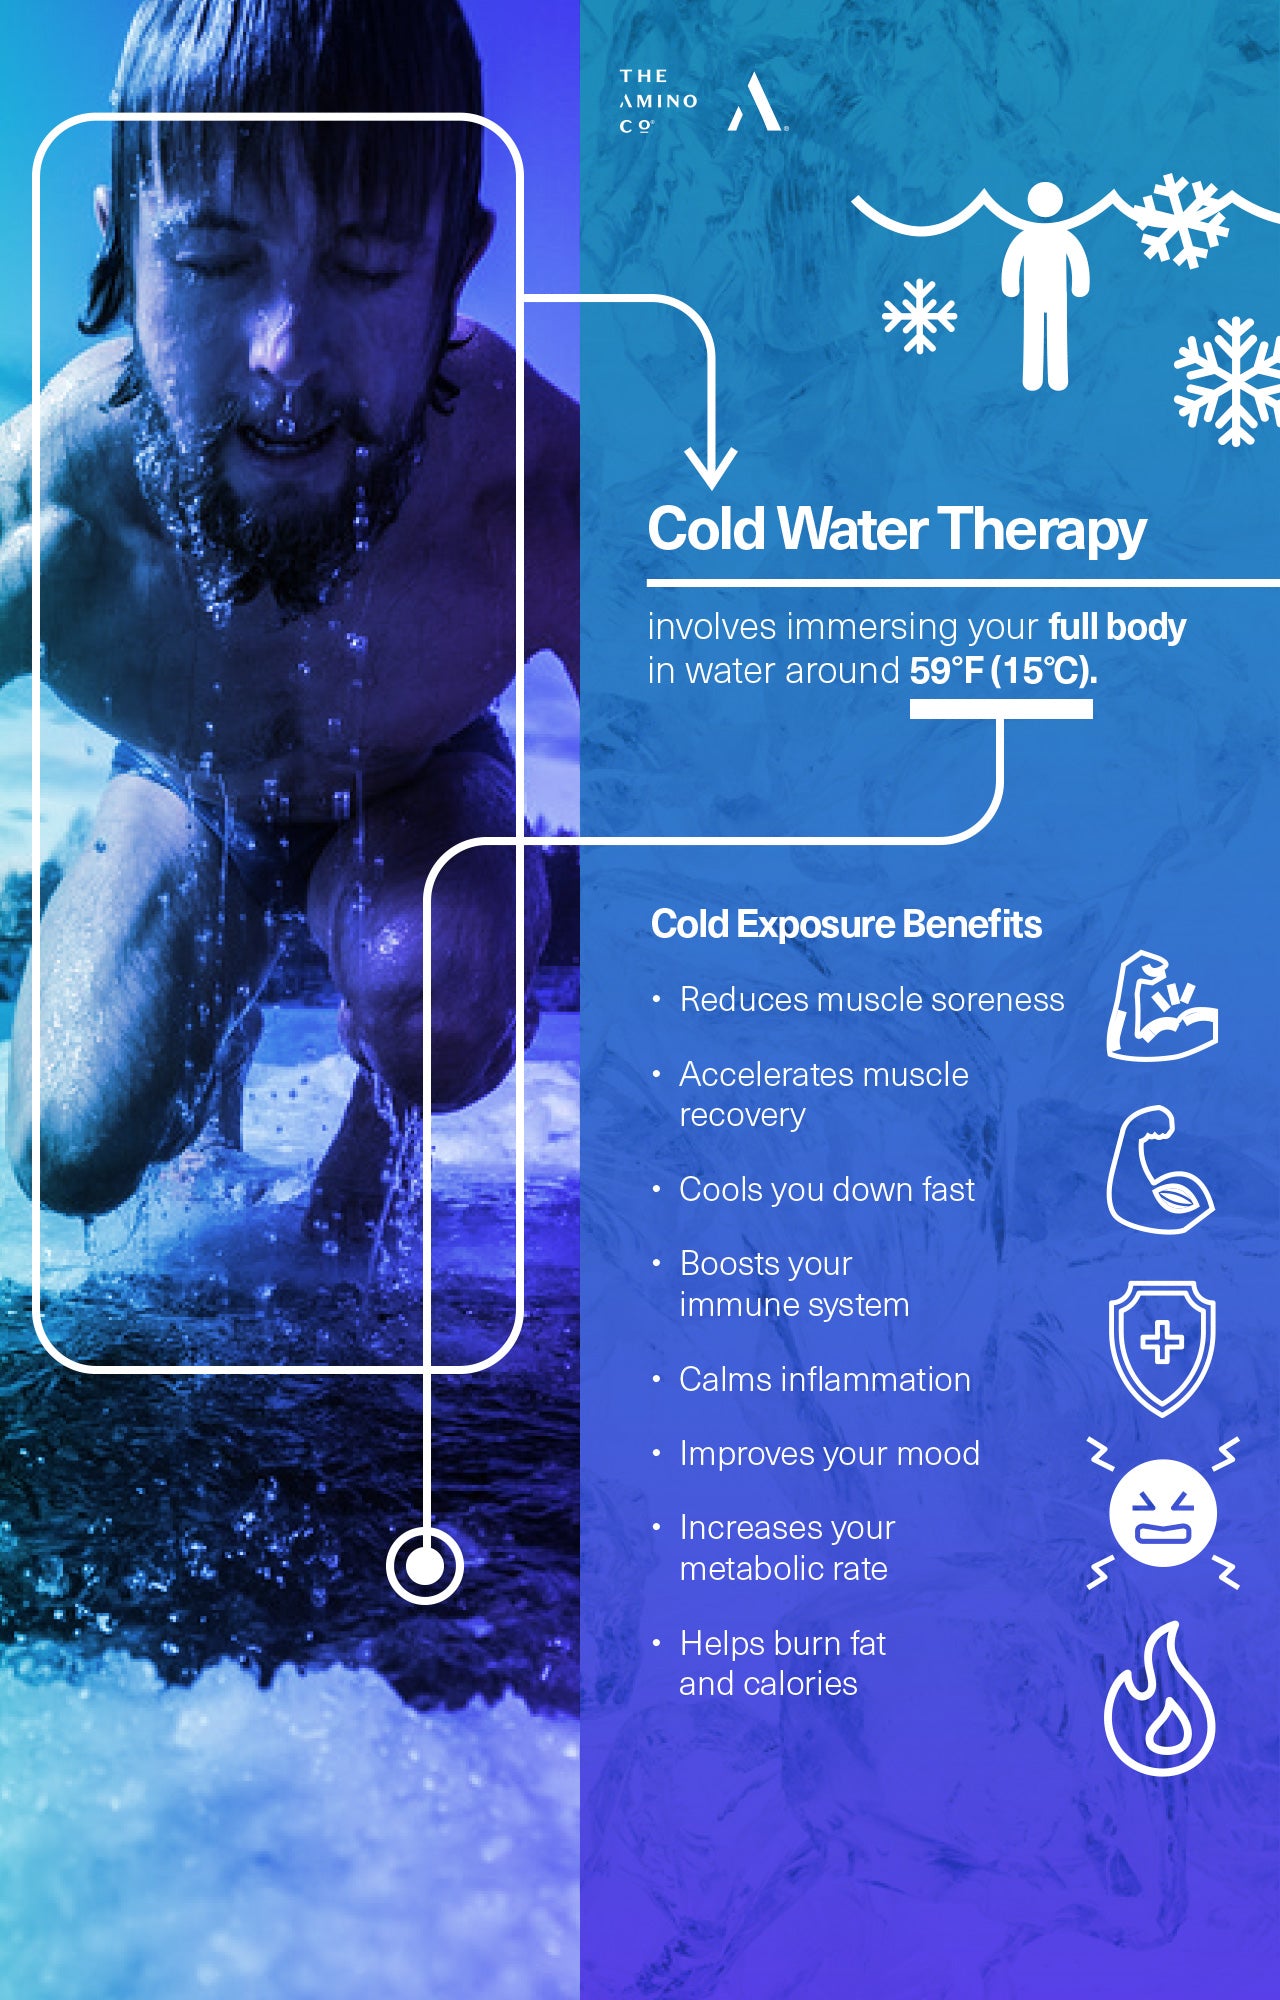 Cold Water Therapy - Move your Frame